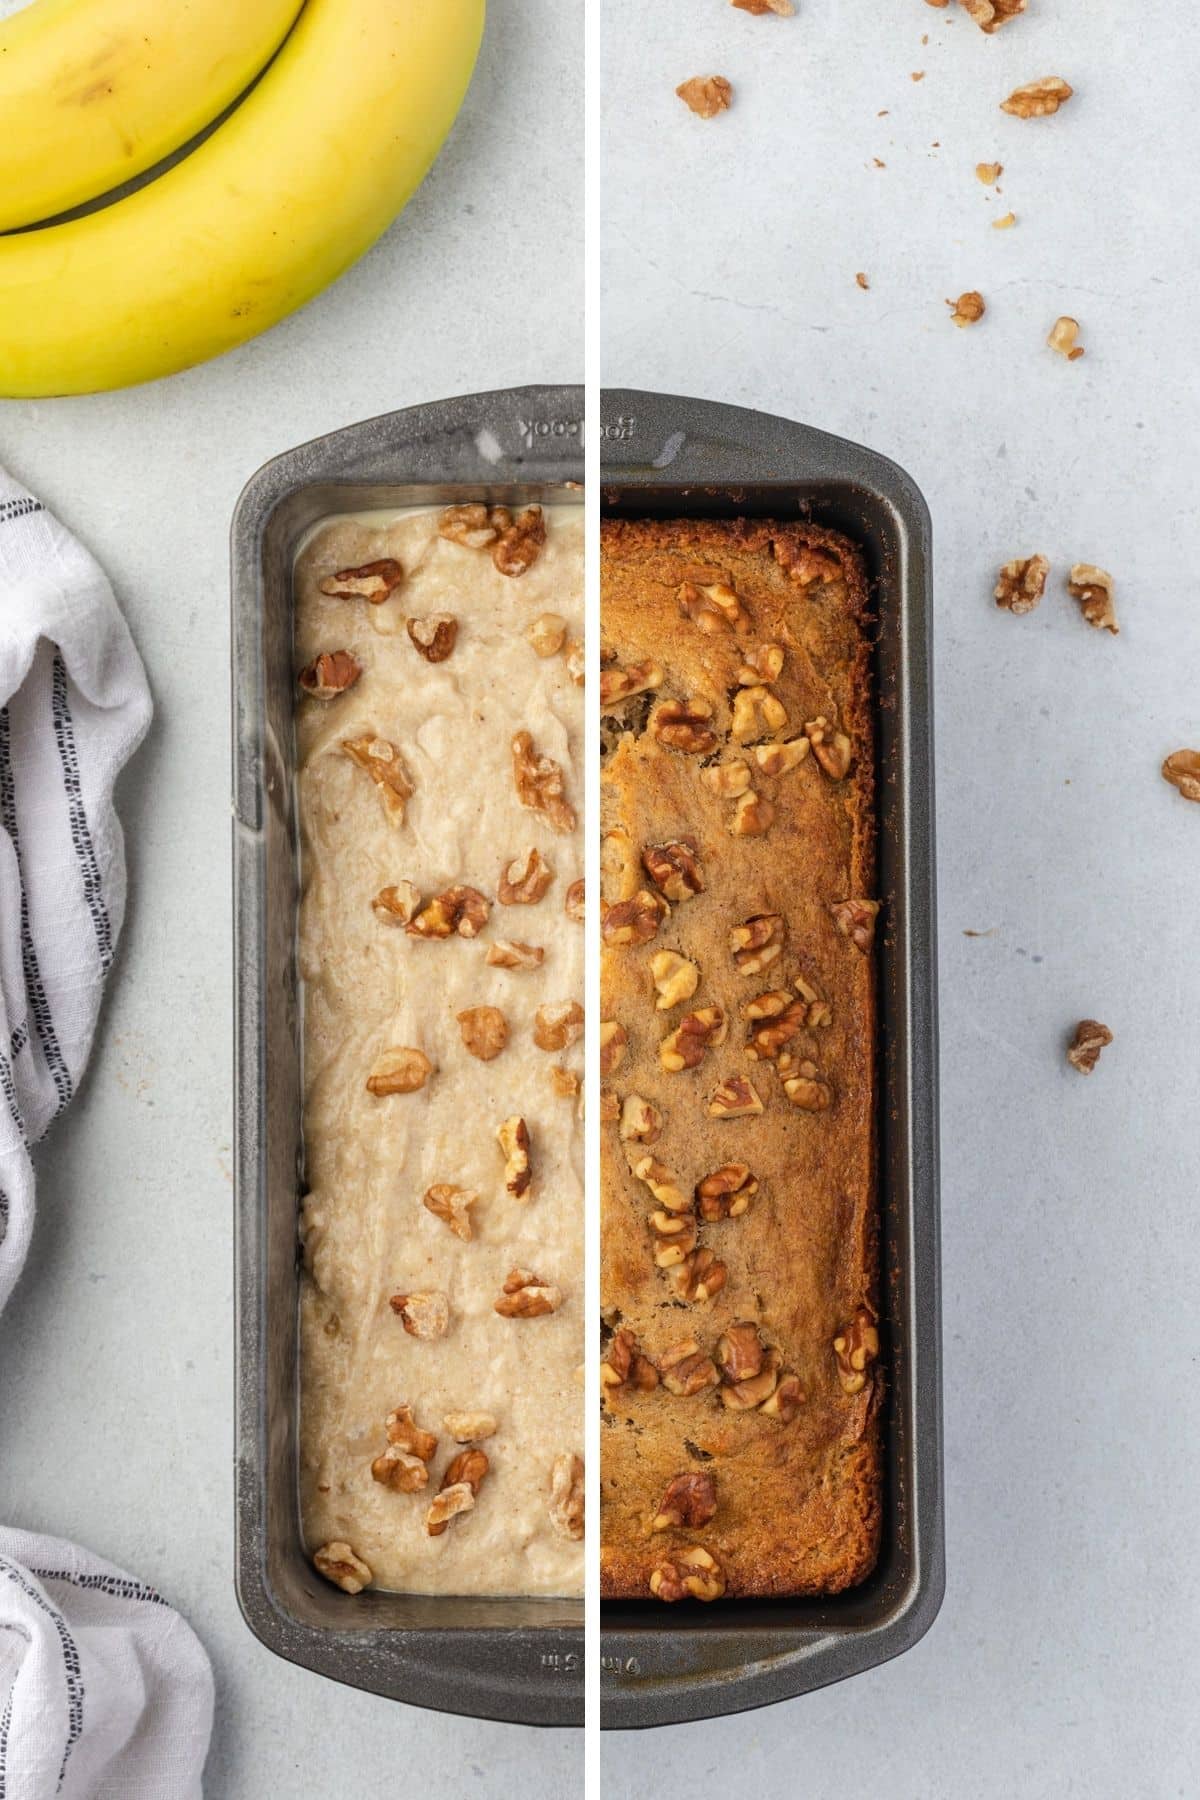 Split image, half showing raw banana bread batter, and the other half is the baked bread.